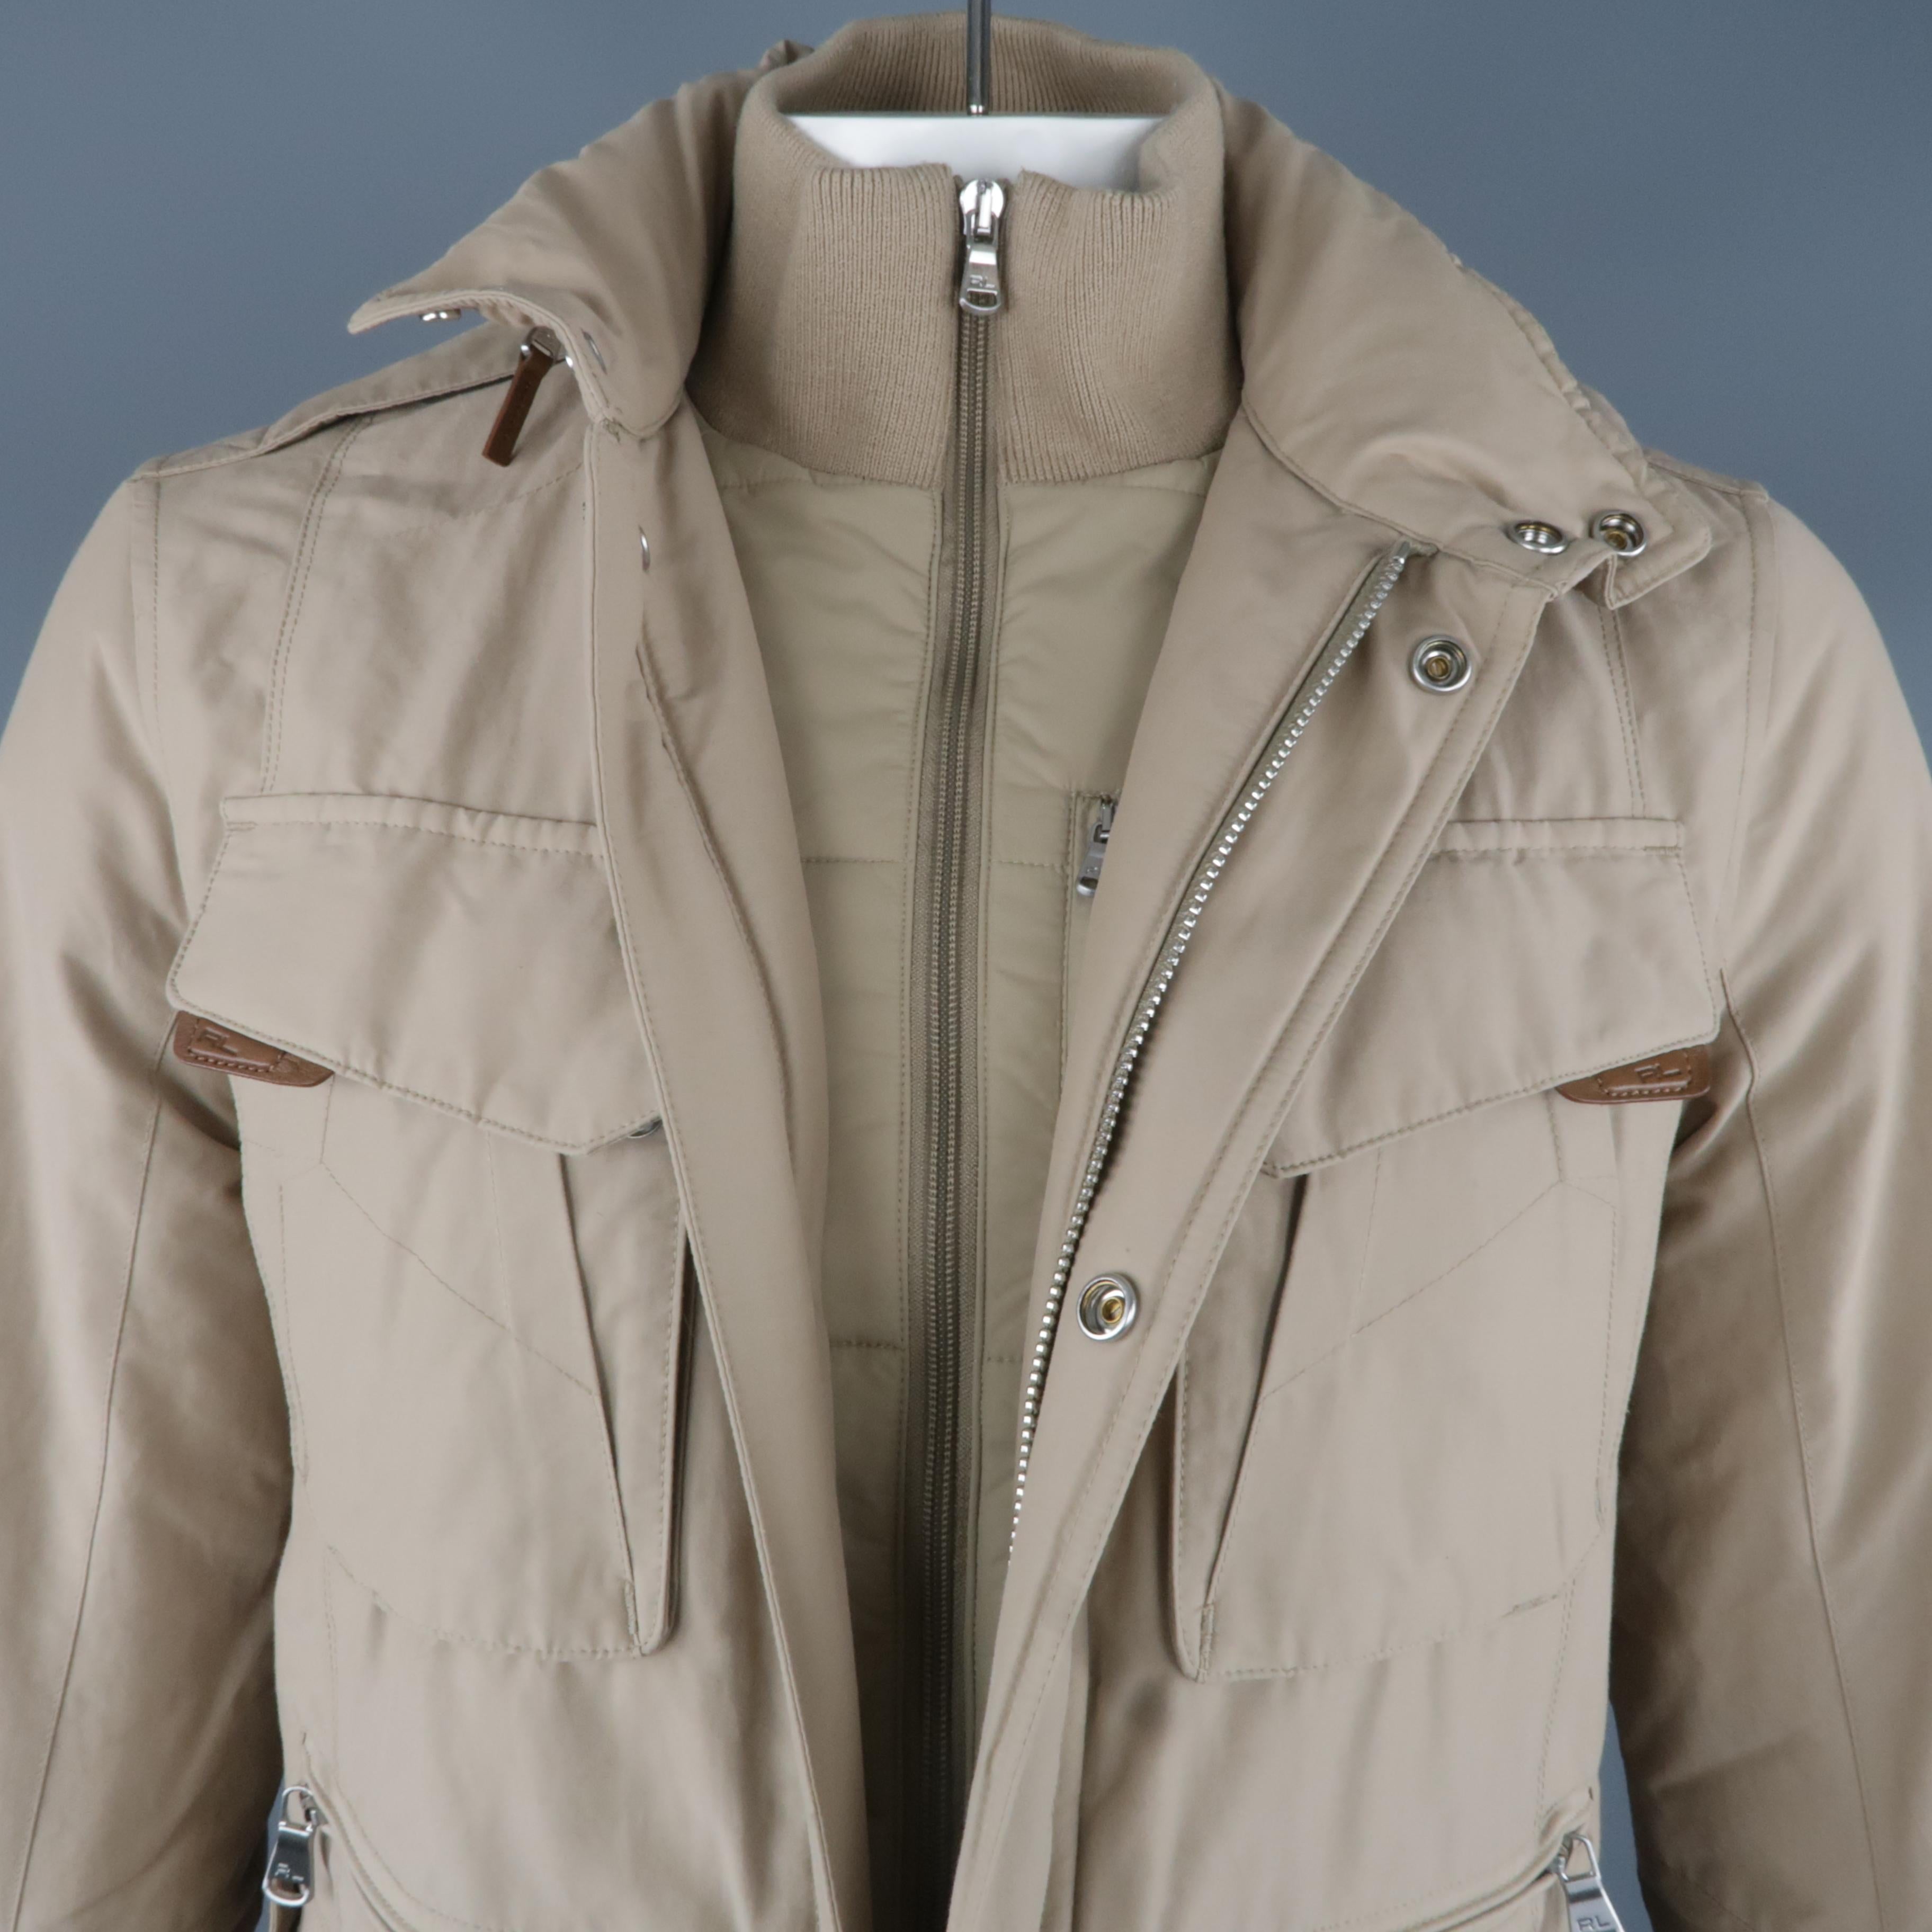 RALPH LAUREN jacket comes in a khaki nylon featuring a 3 in 1 design with a hidden hood detail, full zip closure, and front patch pockets.
 
Excellent Pre-Owned Condition.
Marked: S
 
Measurements:
 
Shoulder: 18.5 in.
Chest: 41 in.
Length: 28.5 in.